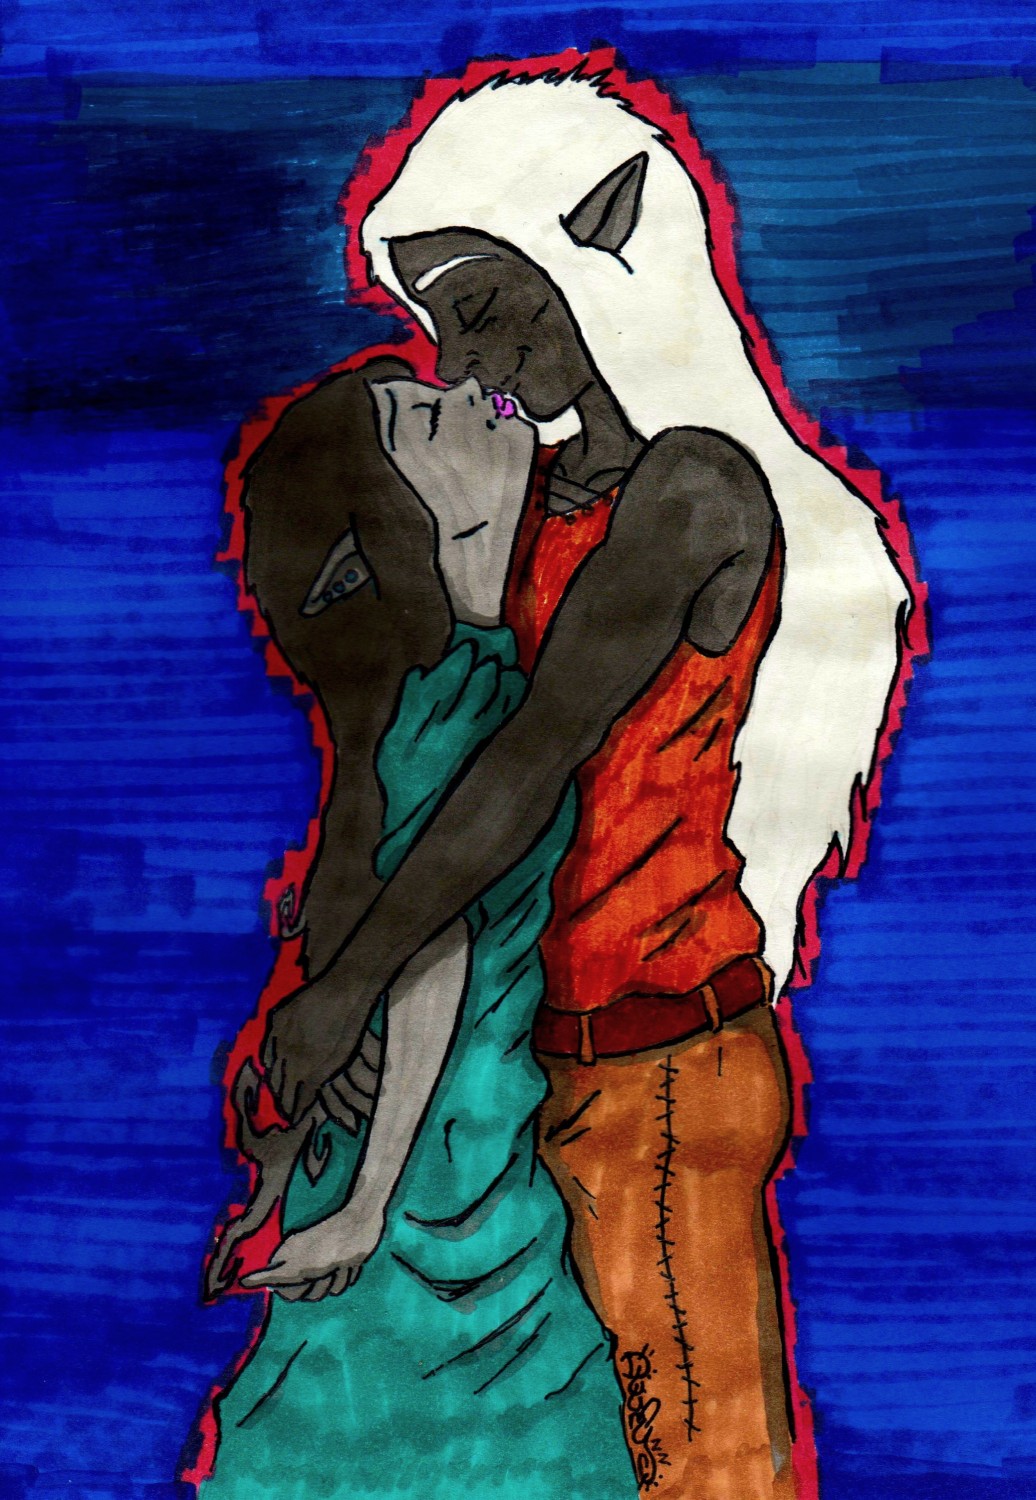 couple kissing standing drawing